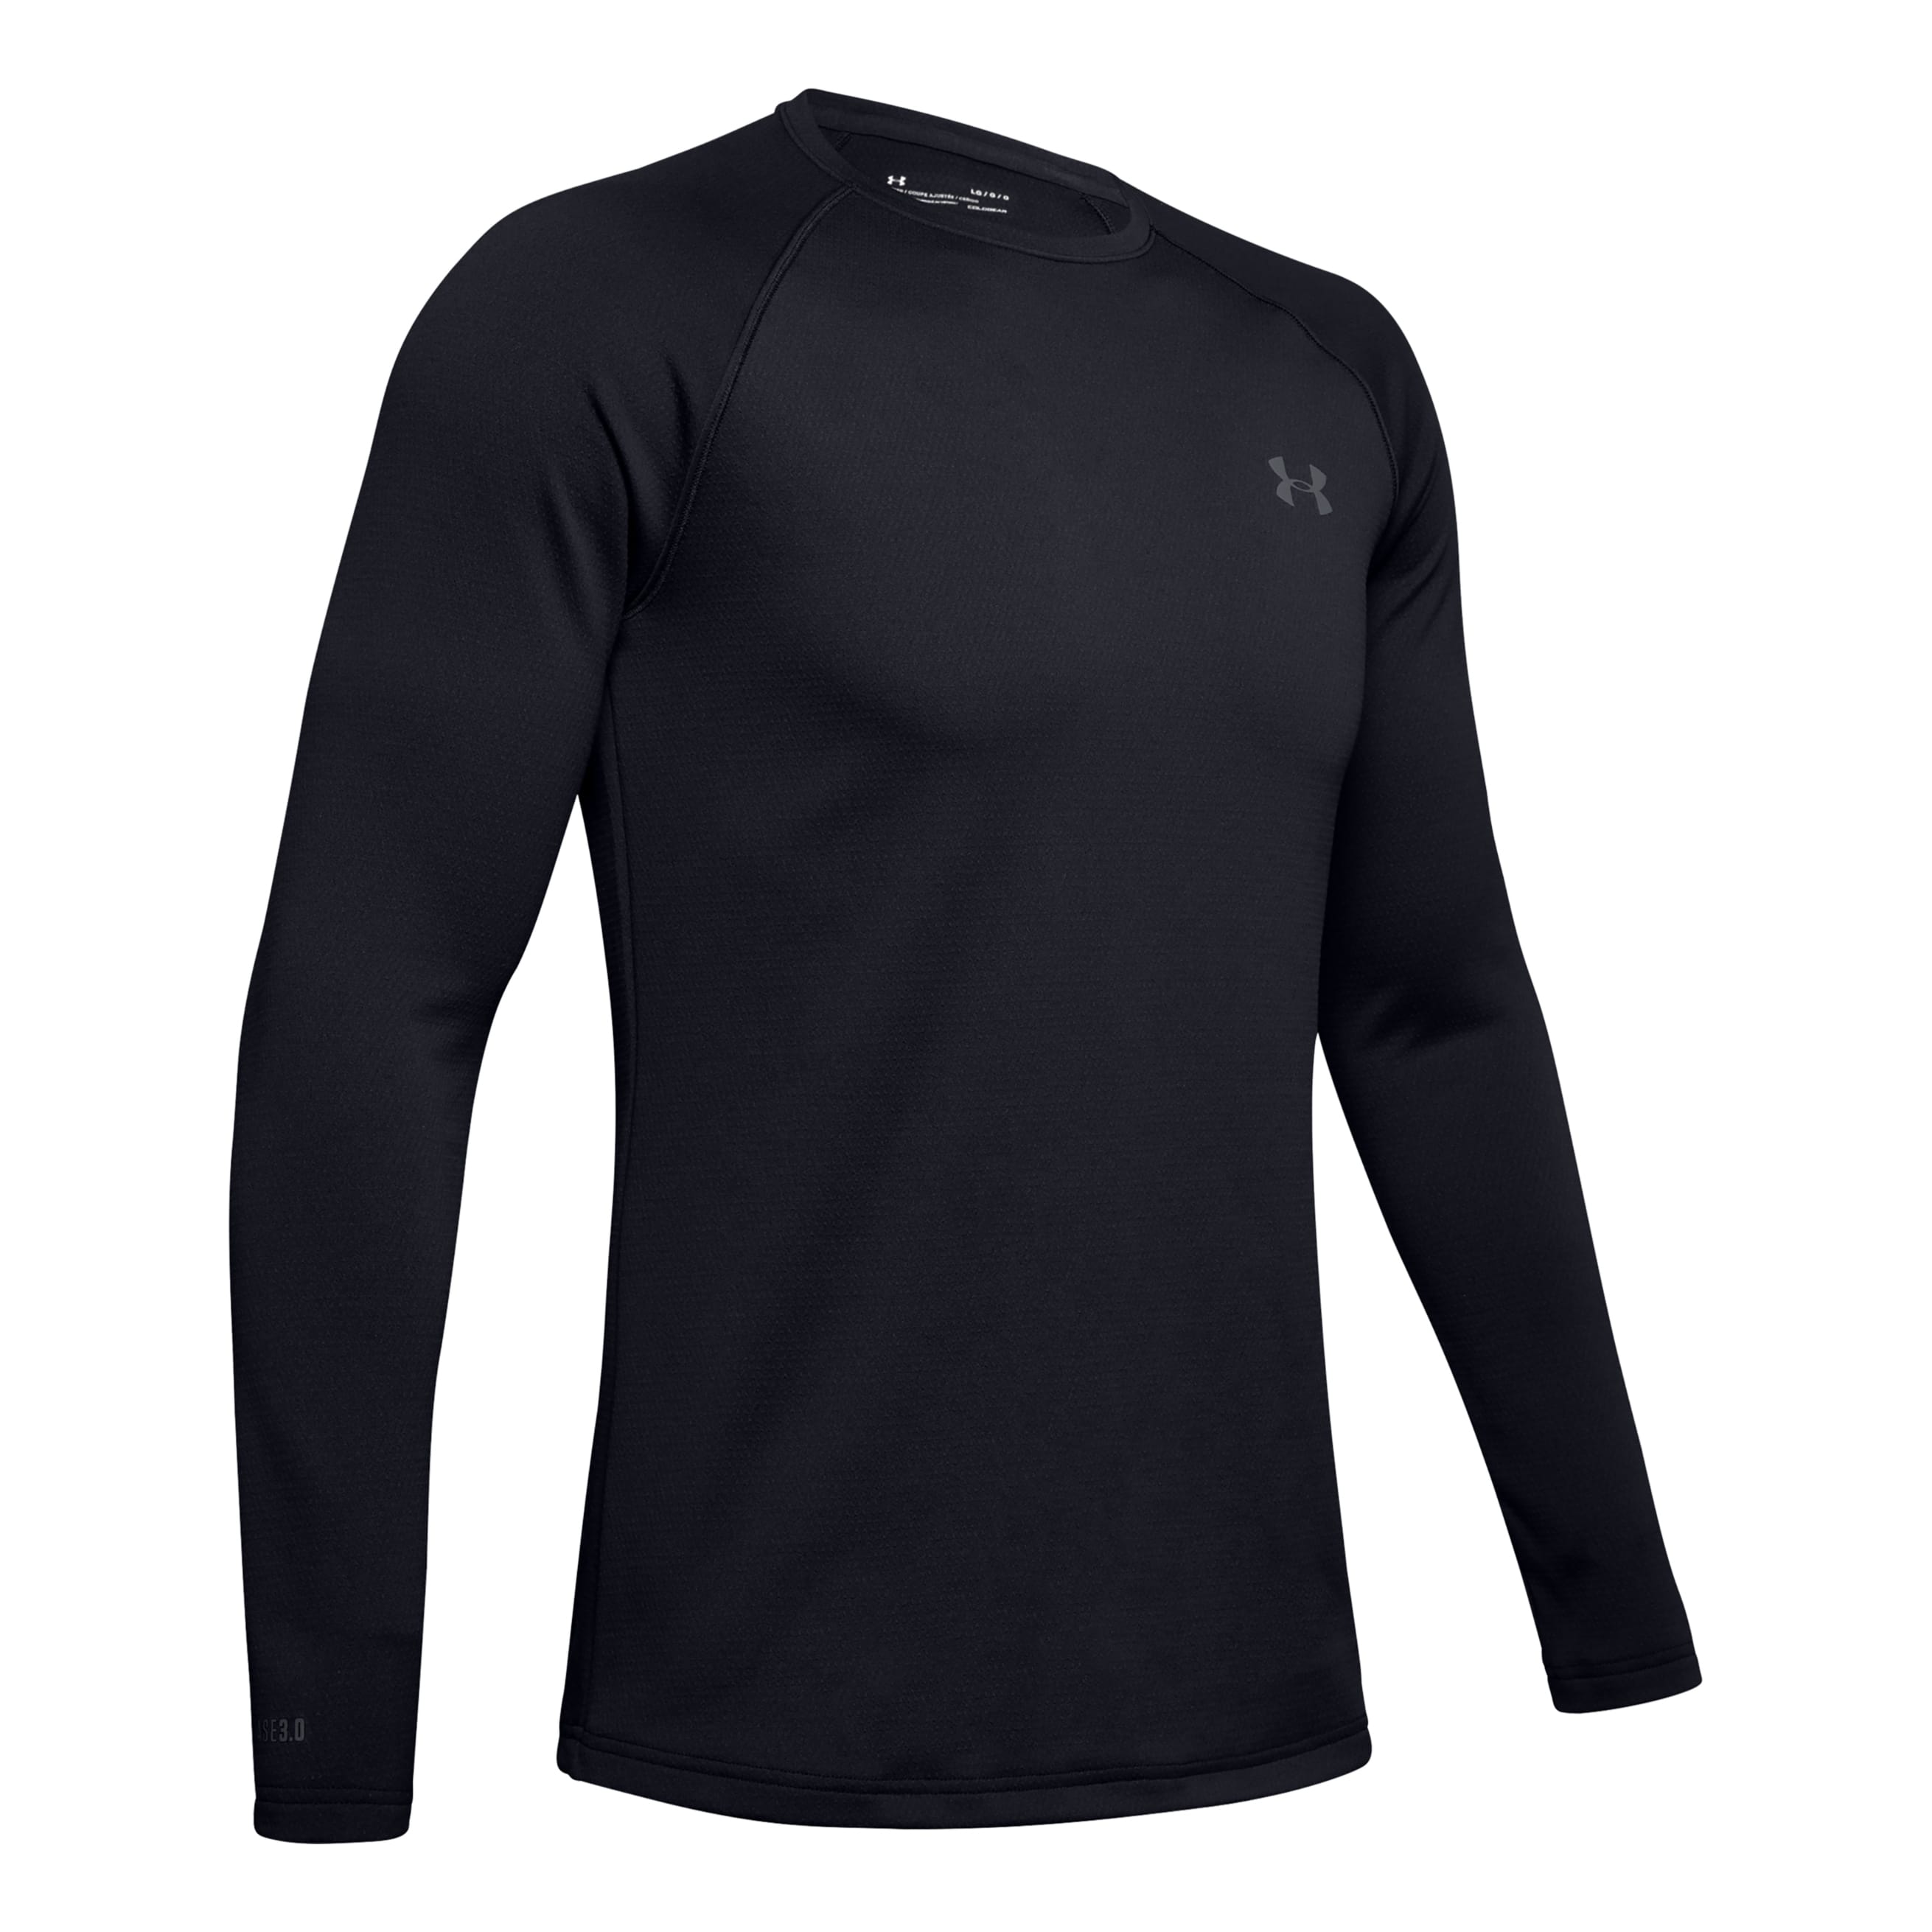 Under Armour® Men's ColdGear® Base 3.0 Series Packaged Long-Sleeve